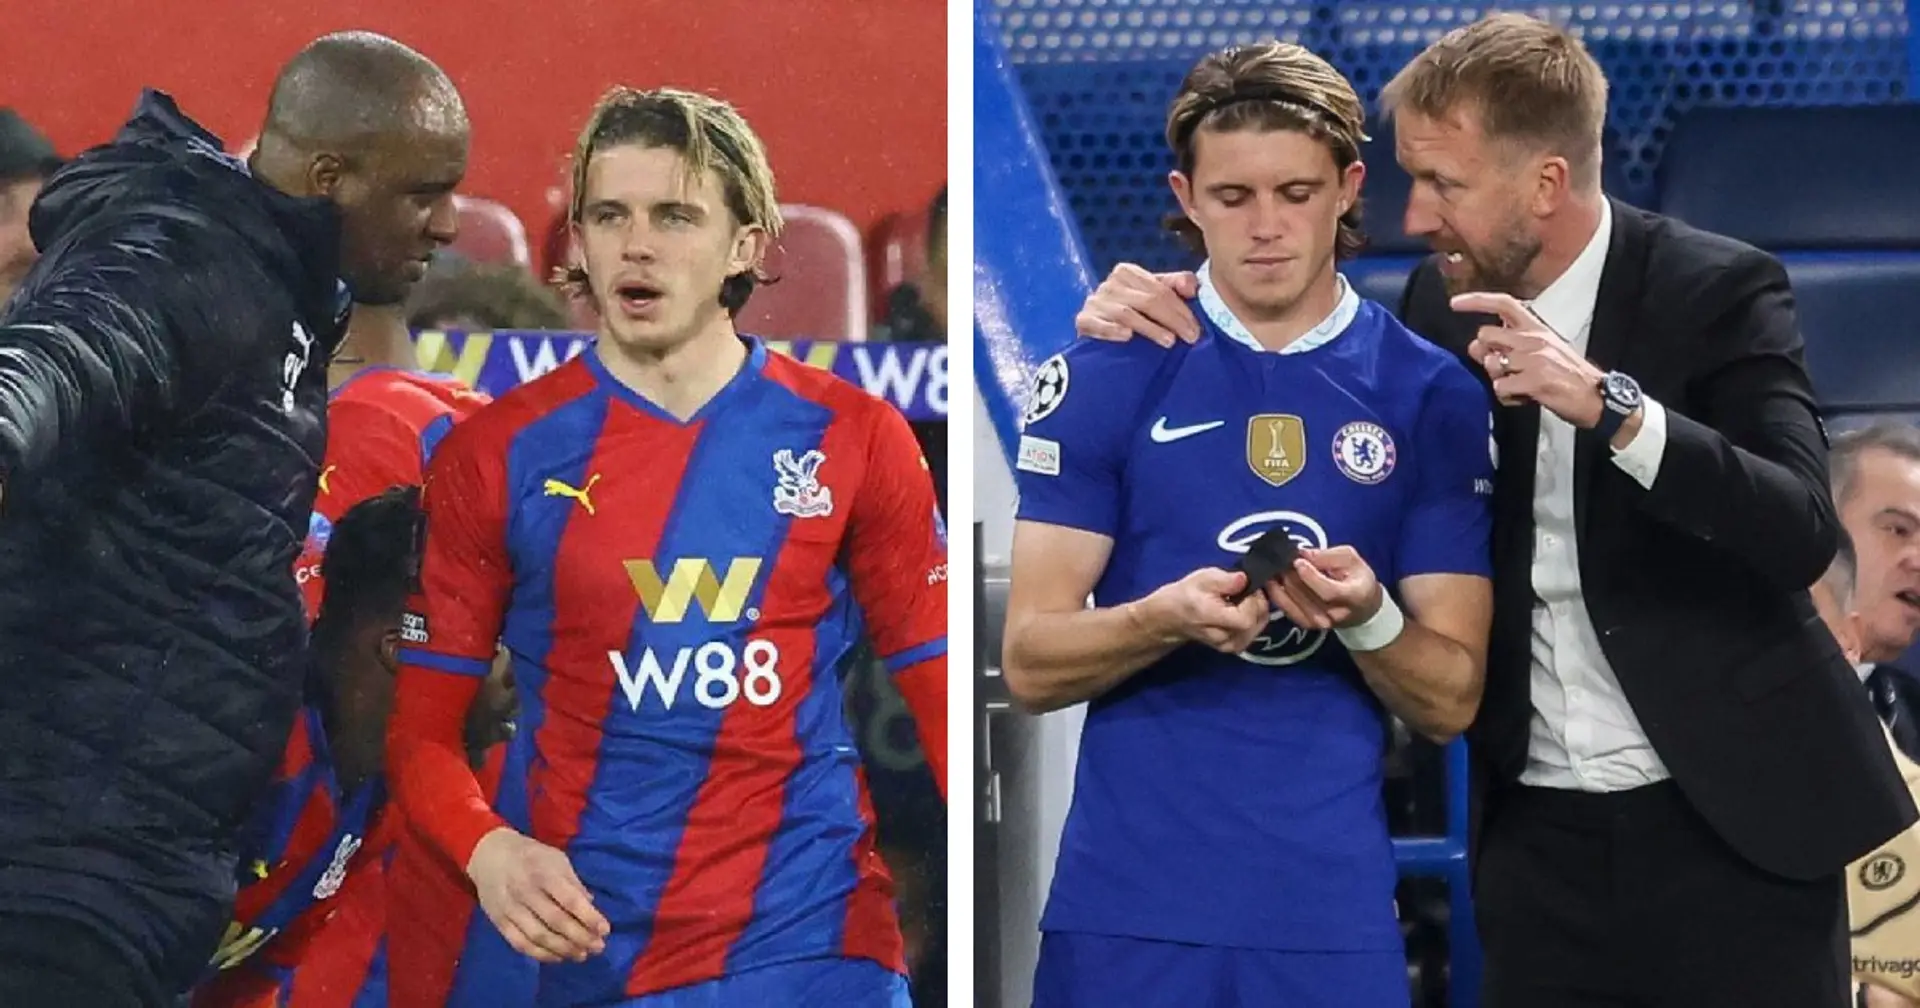 'Don't have any doubt': Vieira on the kind of reception Gallagher will receive at Selhurst Park